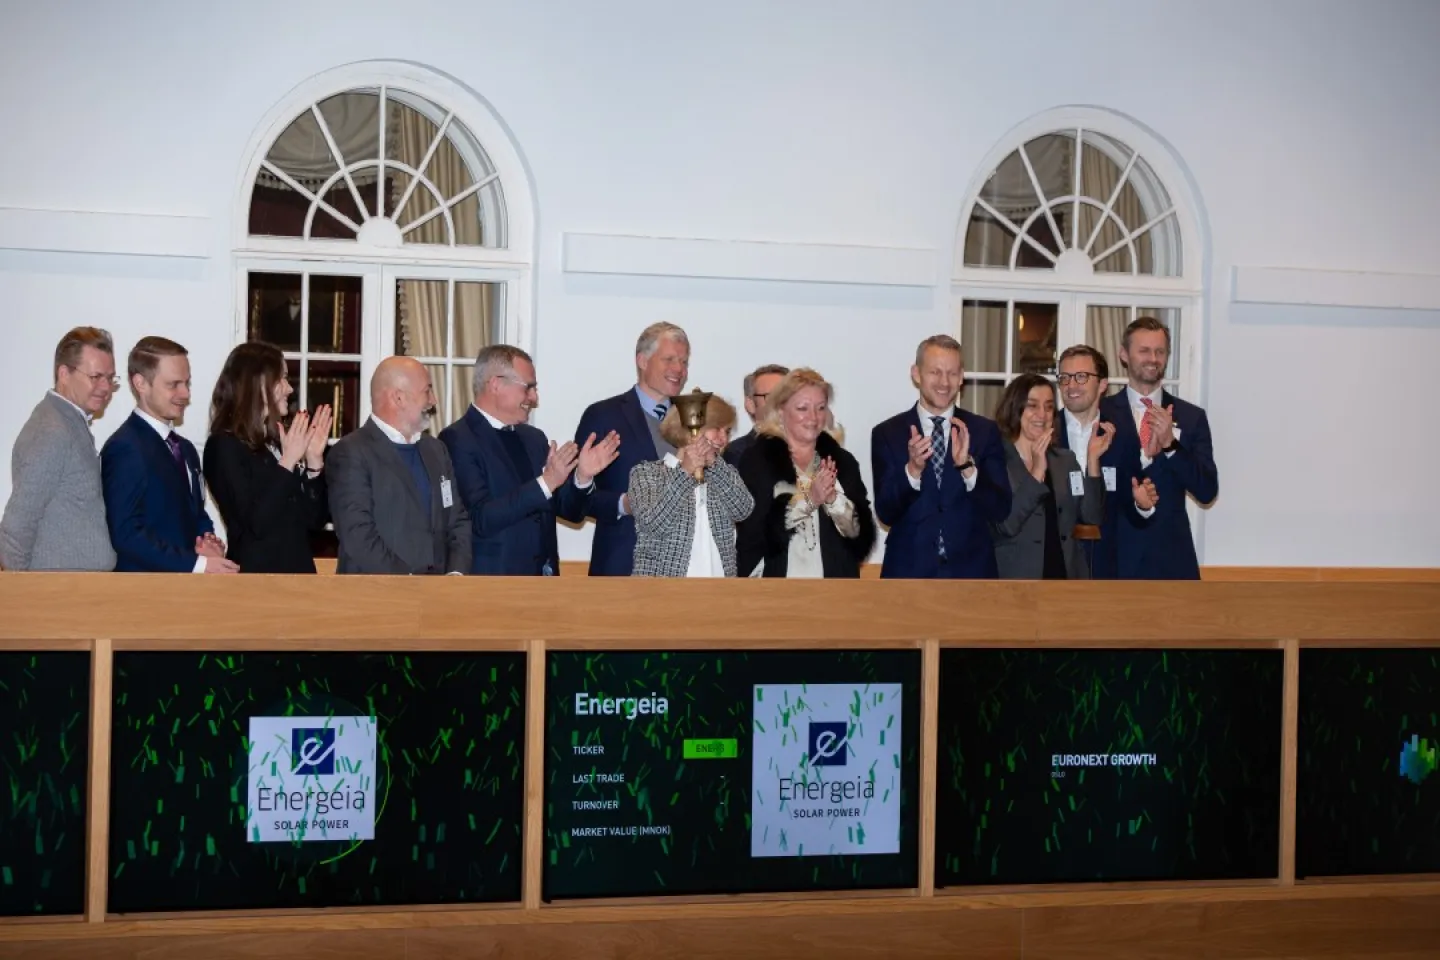 Dobrila Matanovic, Head of Accounting at Energeia, rang the bell this morning to celebrate the company’s admission to Euronext Growth Oslo. They were welcomed by Eirik Høiby Ausland, Head of Nordic Listing at Oslo Børs (Photo: Chris Fey/ NTB)